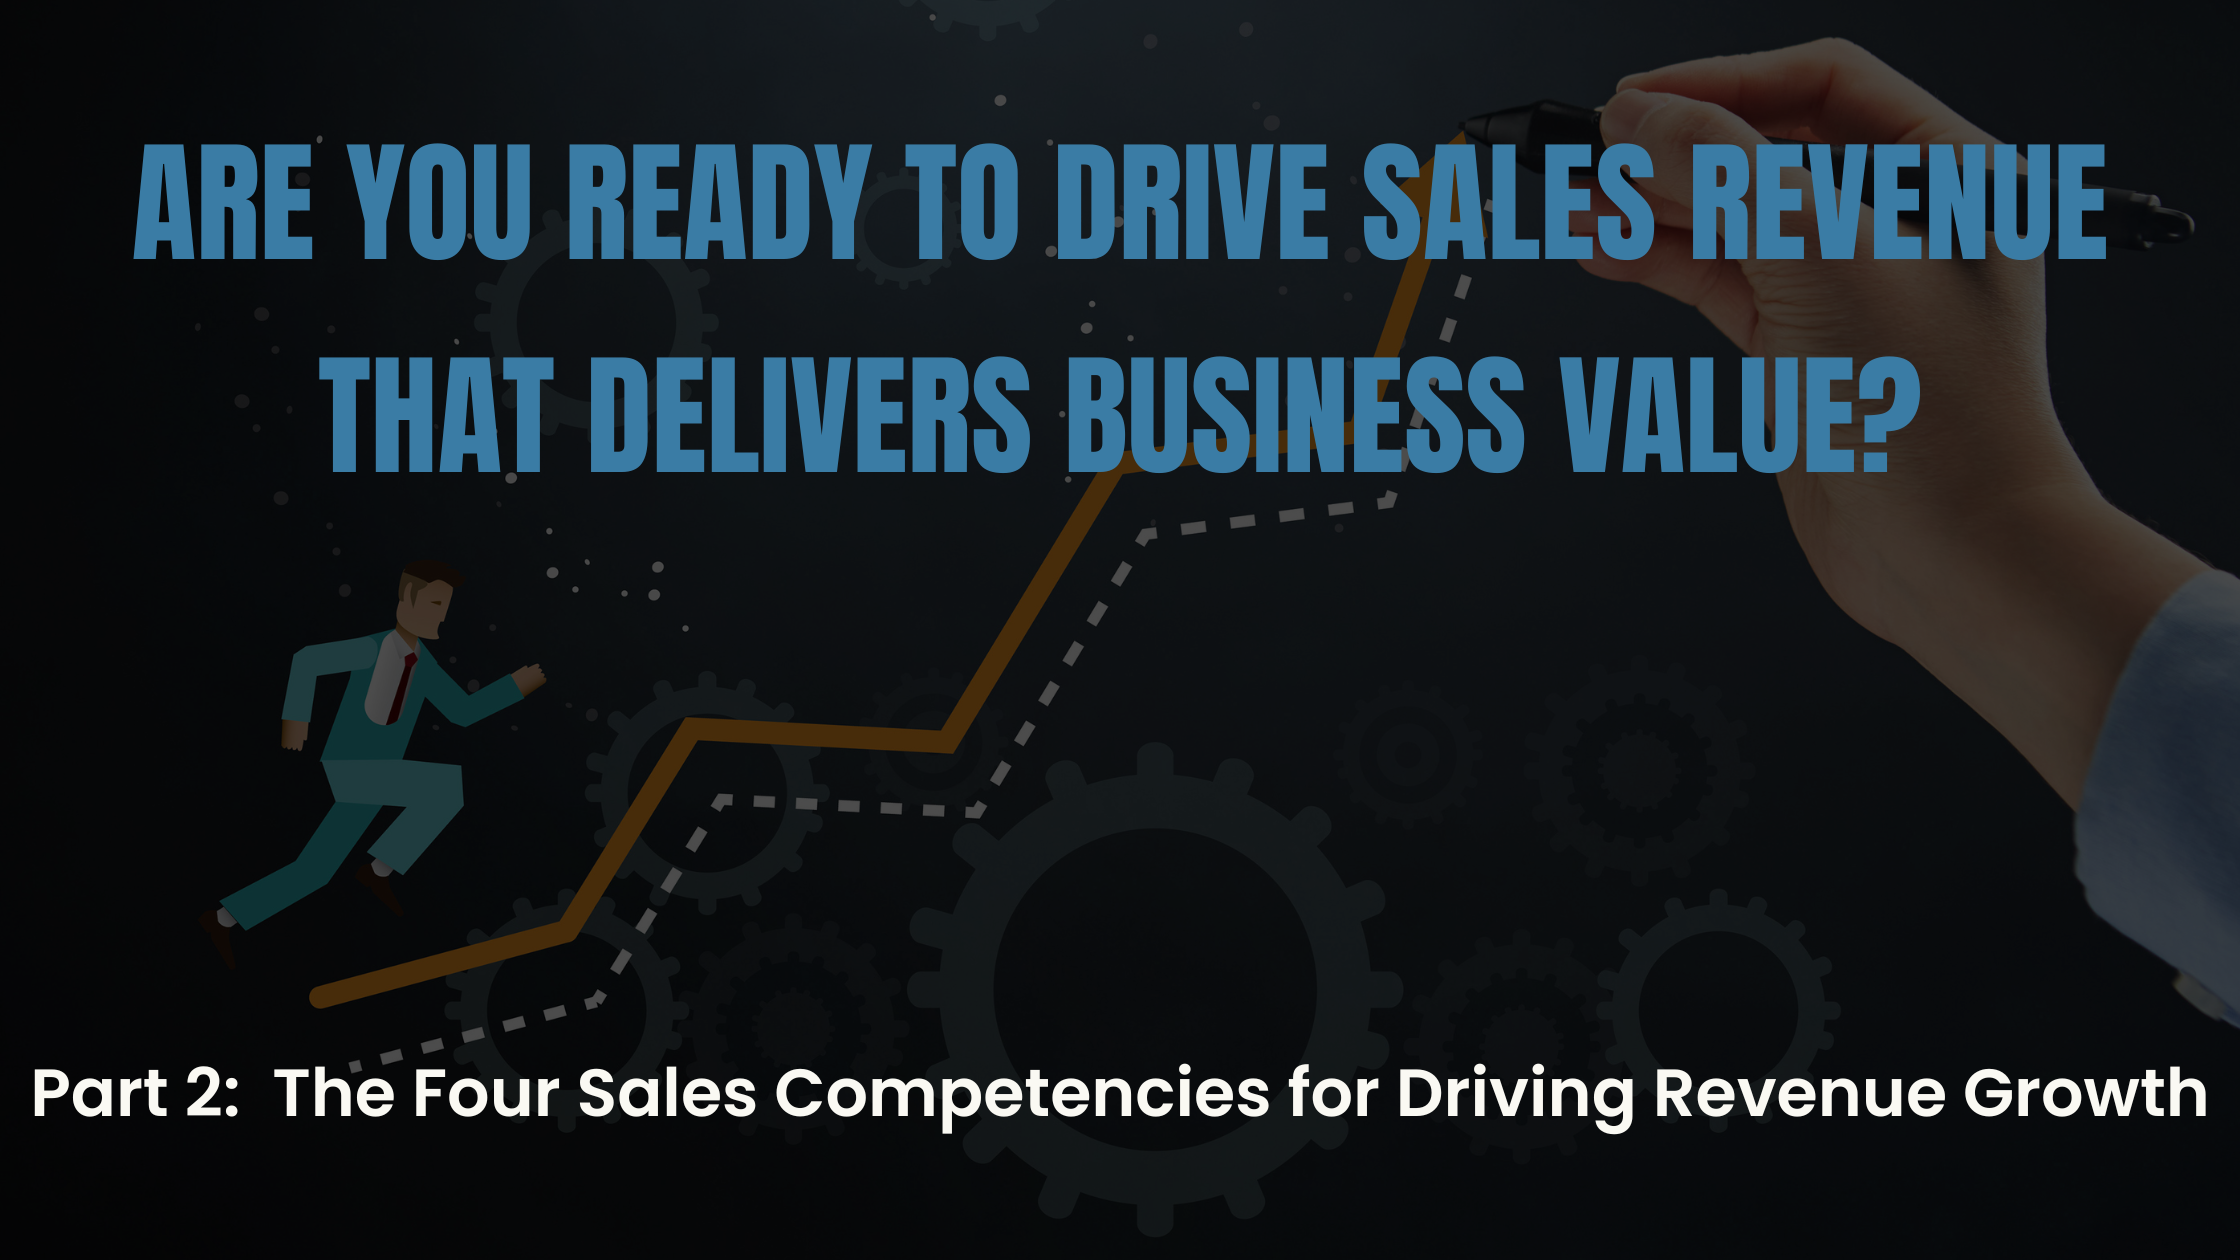 Sales Competencies Driving Sustainable Revenue Growth - Sales Strategy, Process, Training, and Technology.